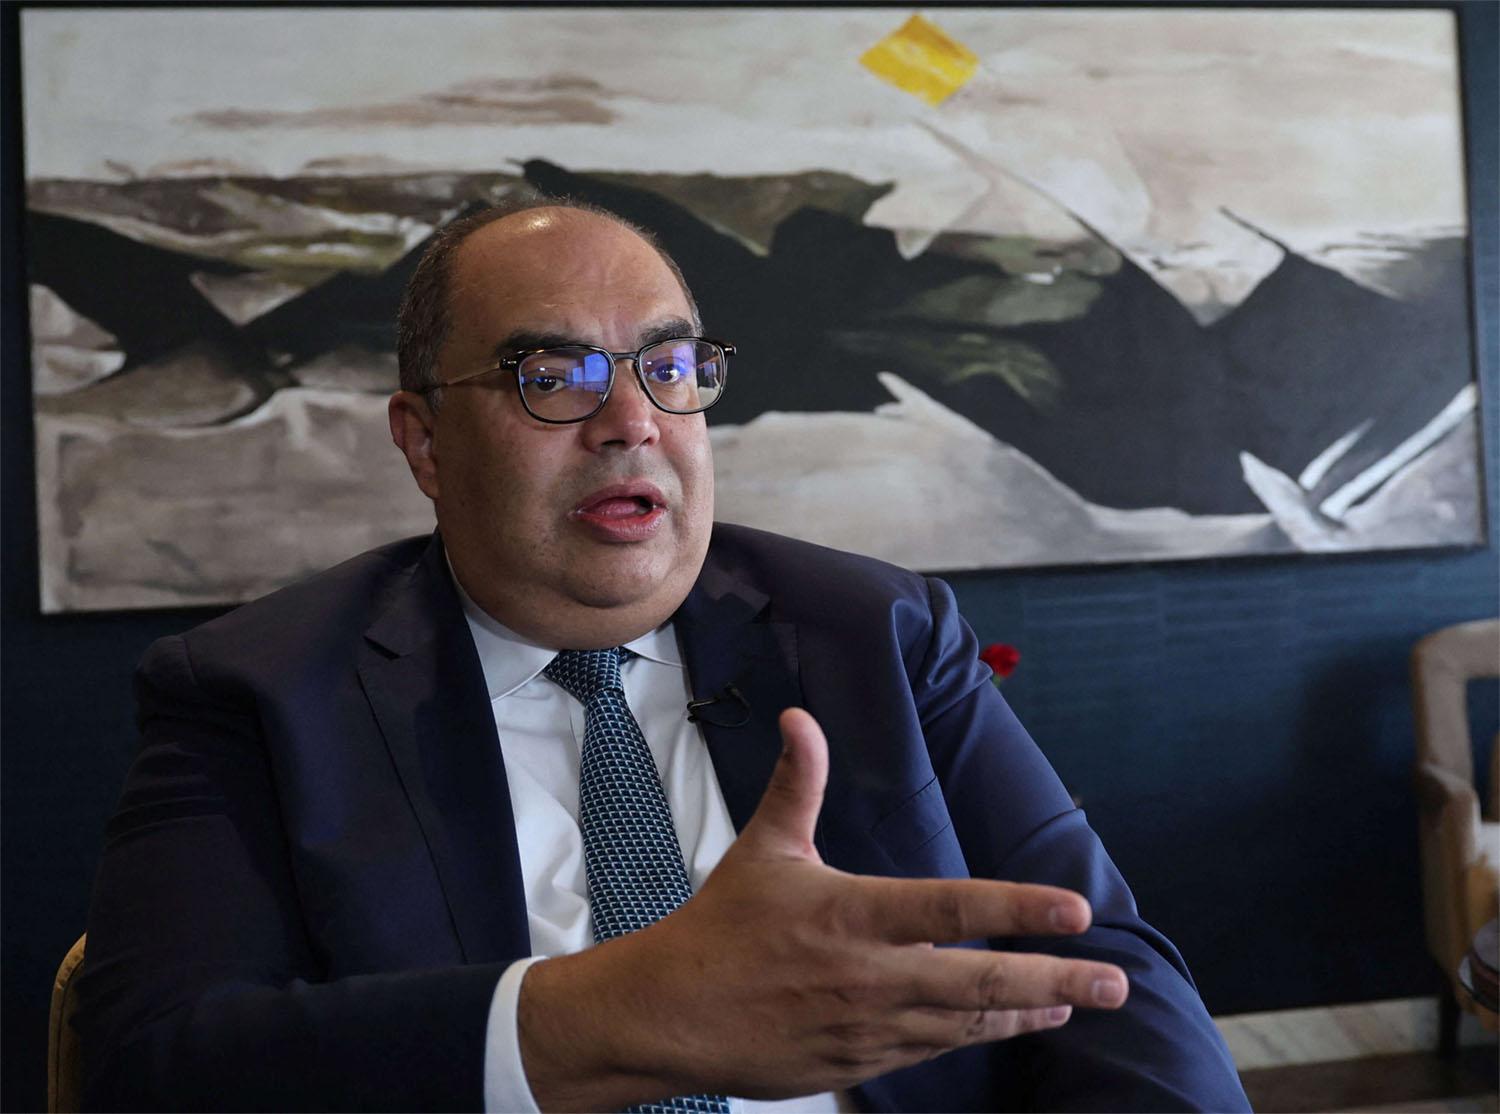 Mohieldin says the finance architecture of climate is inefficient, insufficient and unfair